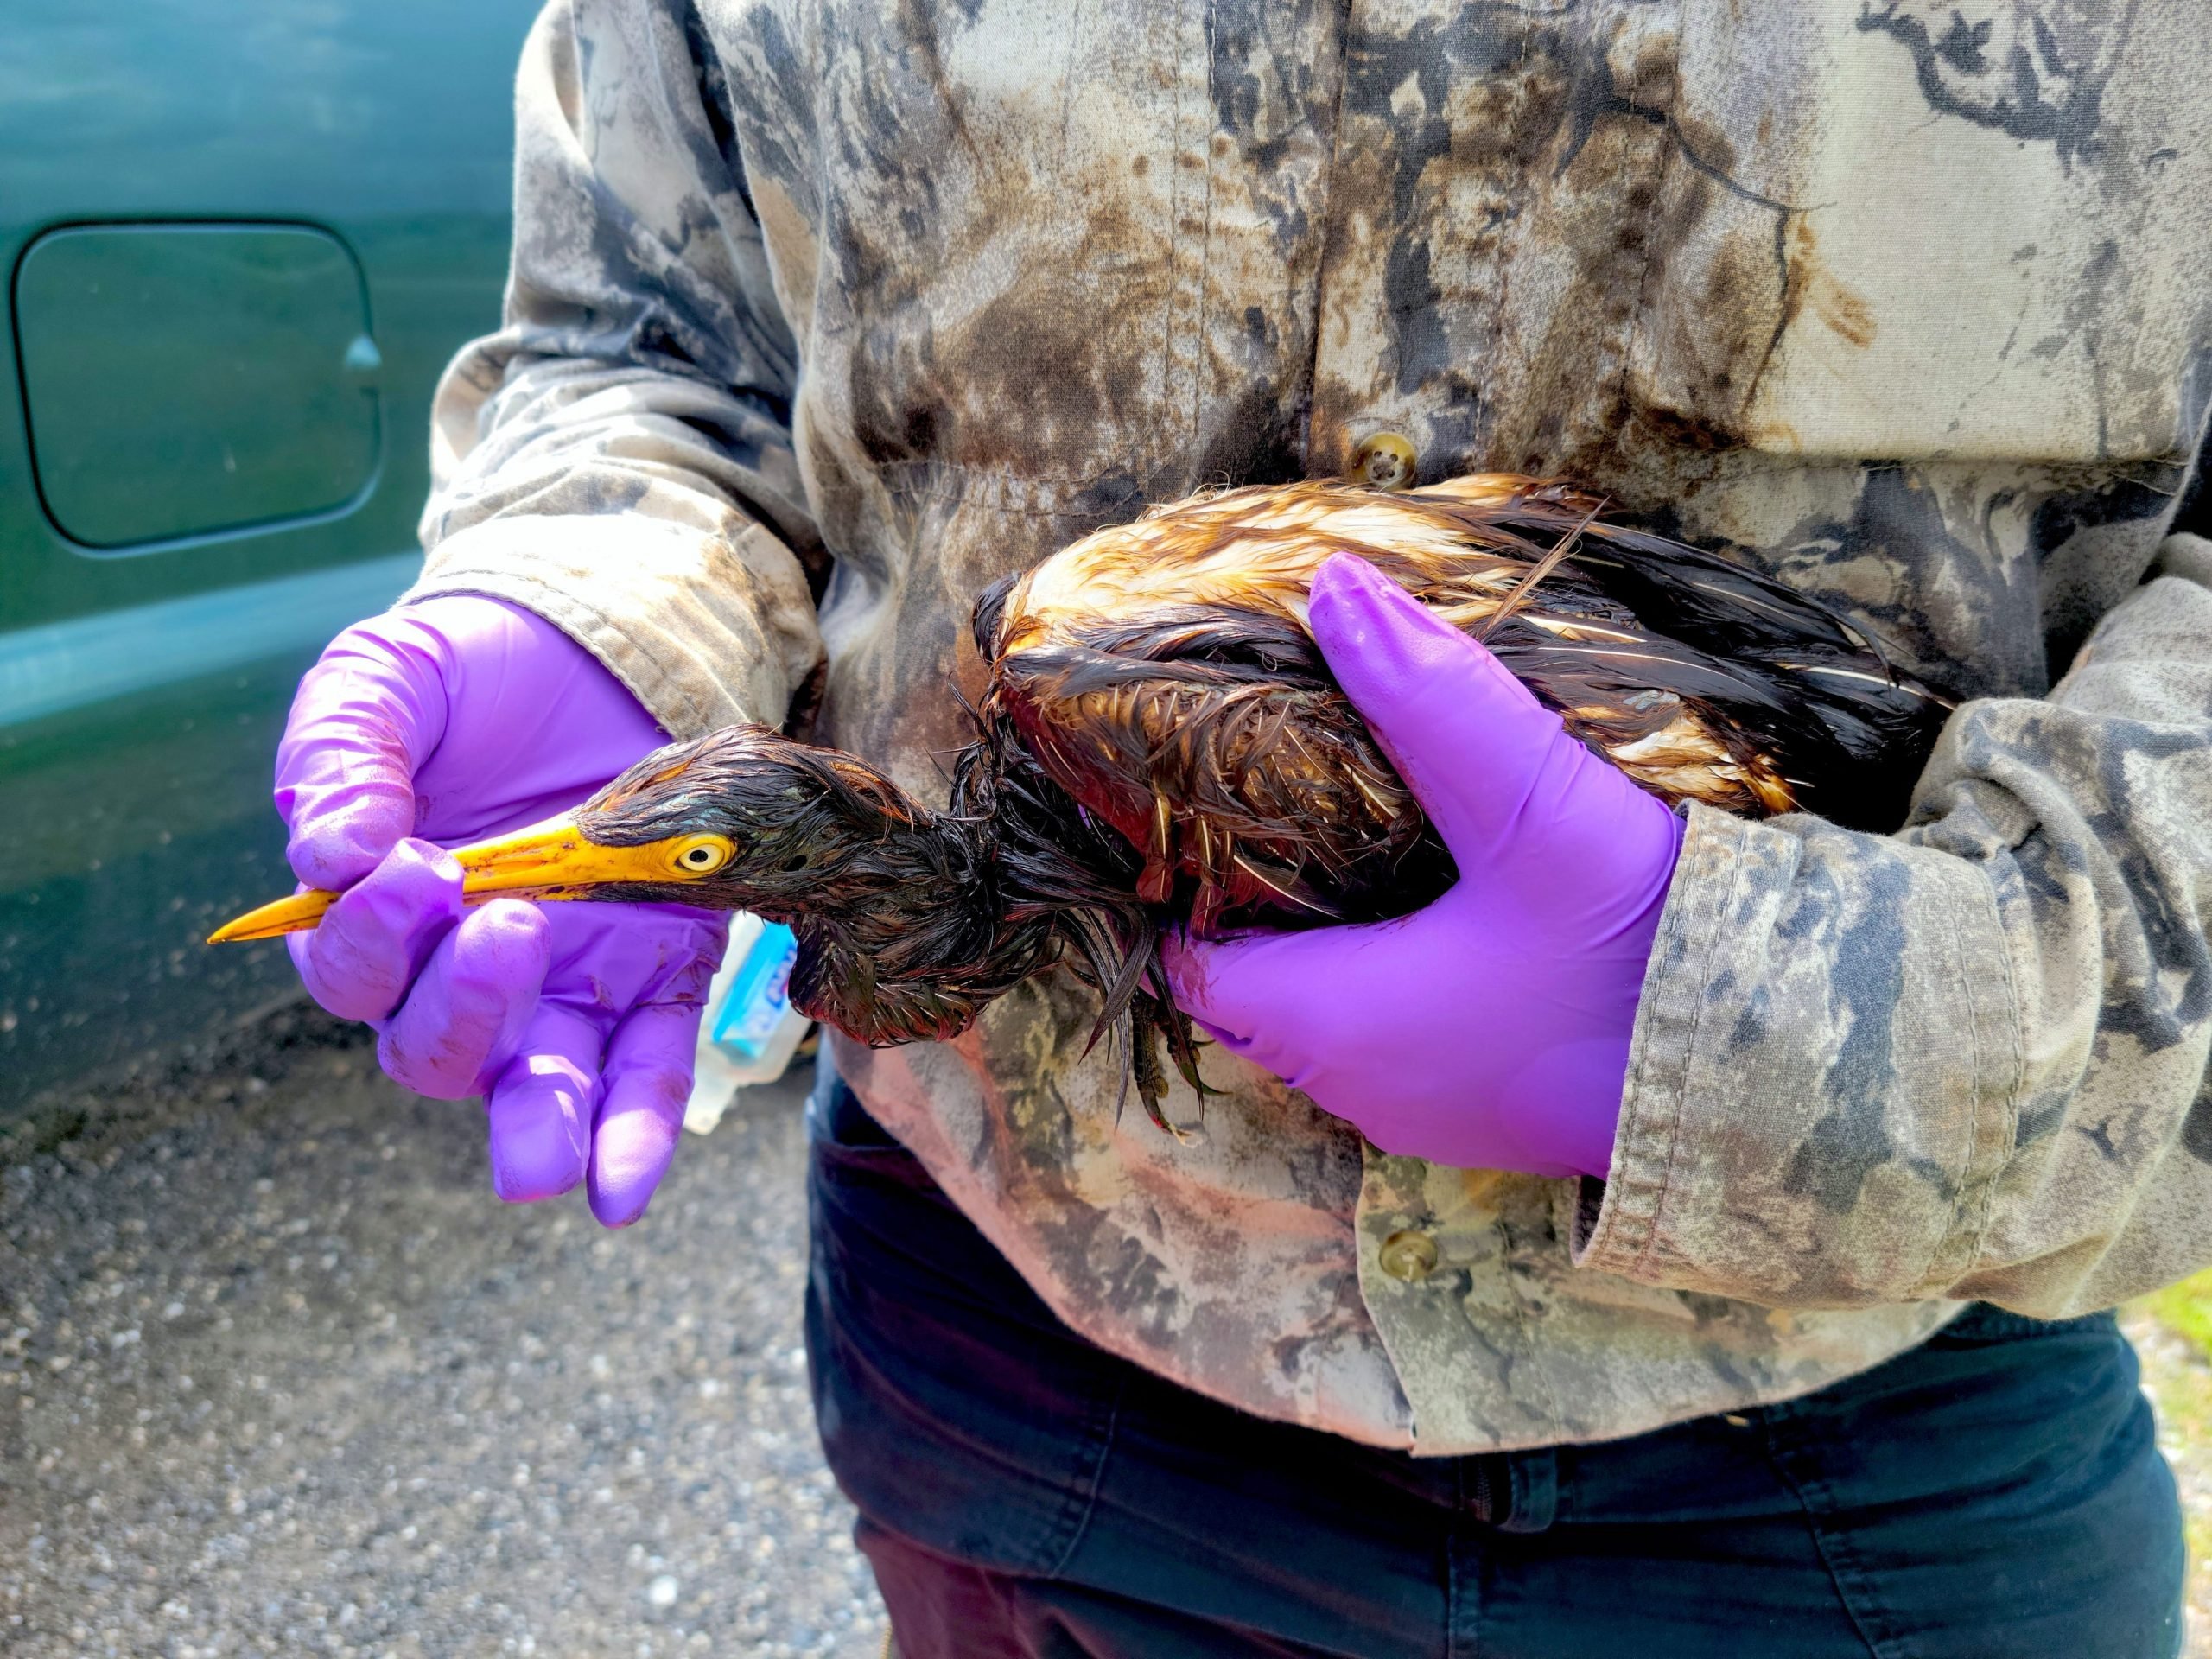 LDWF personnel triage an oiled tricolored heron recovered at the Alliance Refinery oil spill.